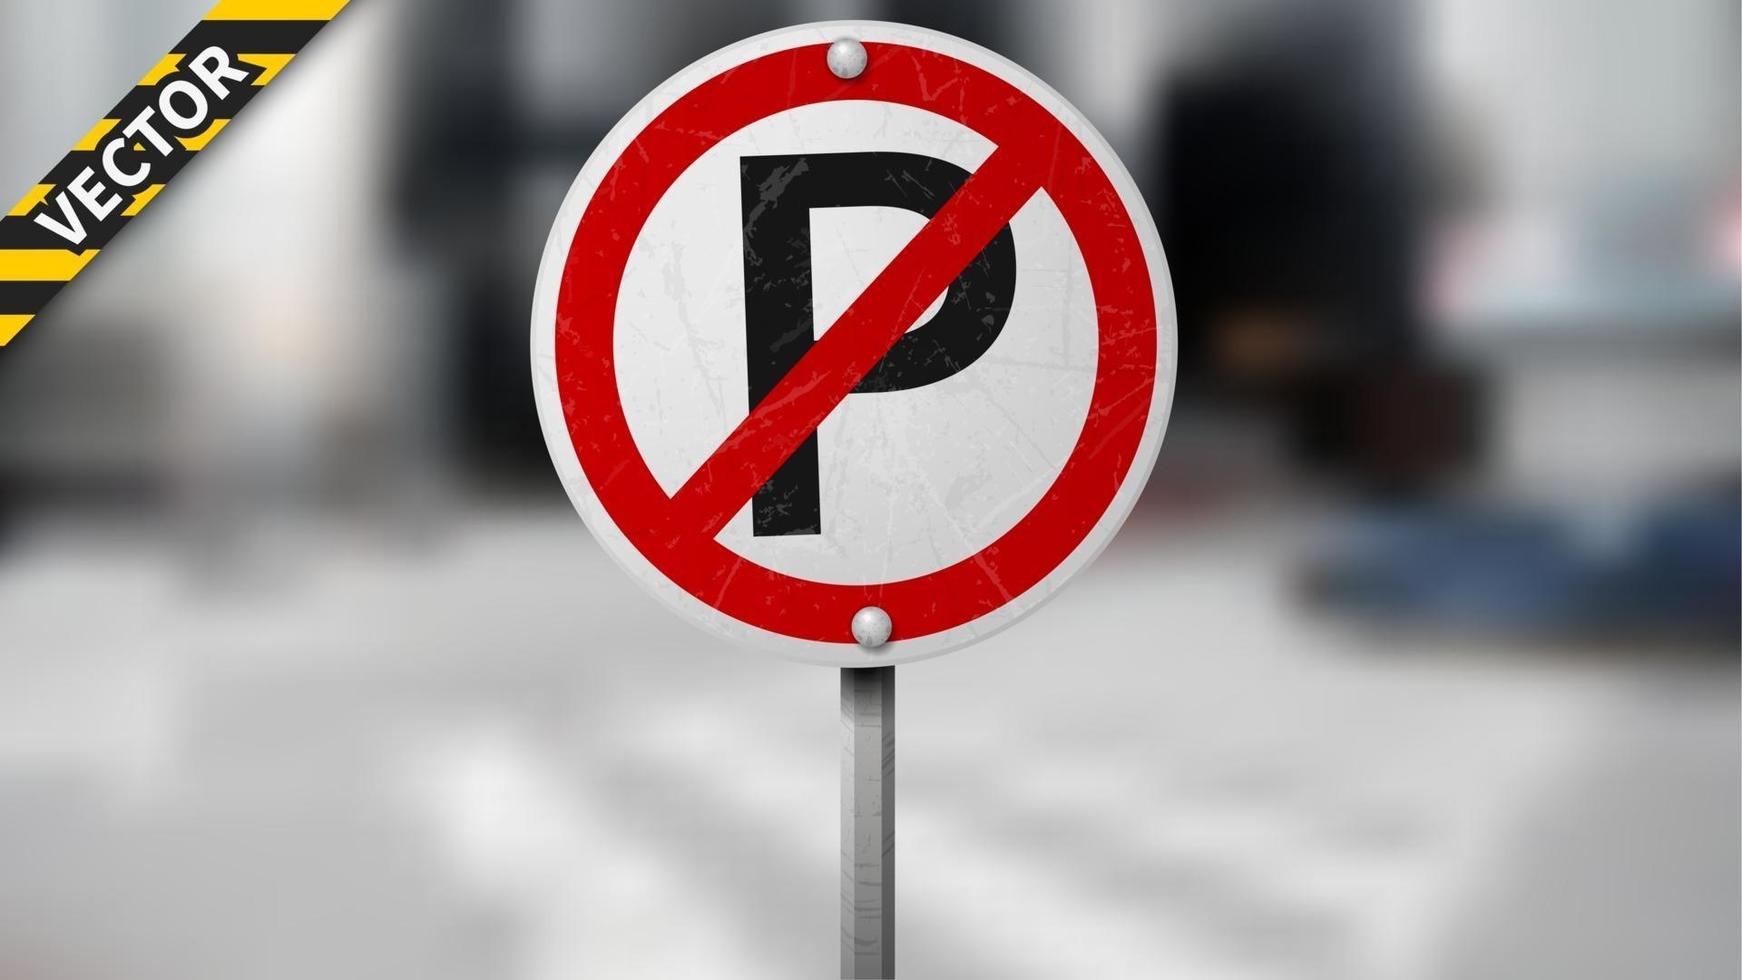 No Parking traffic sign, road sign on blurred traffic background, isolated and easy to edit. Vector Illustration